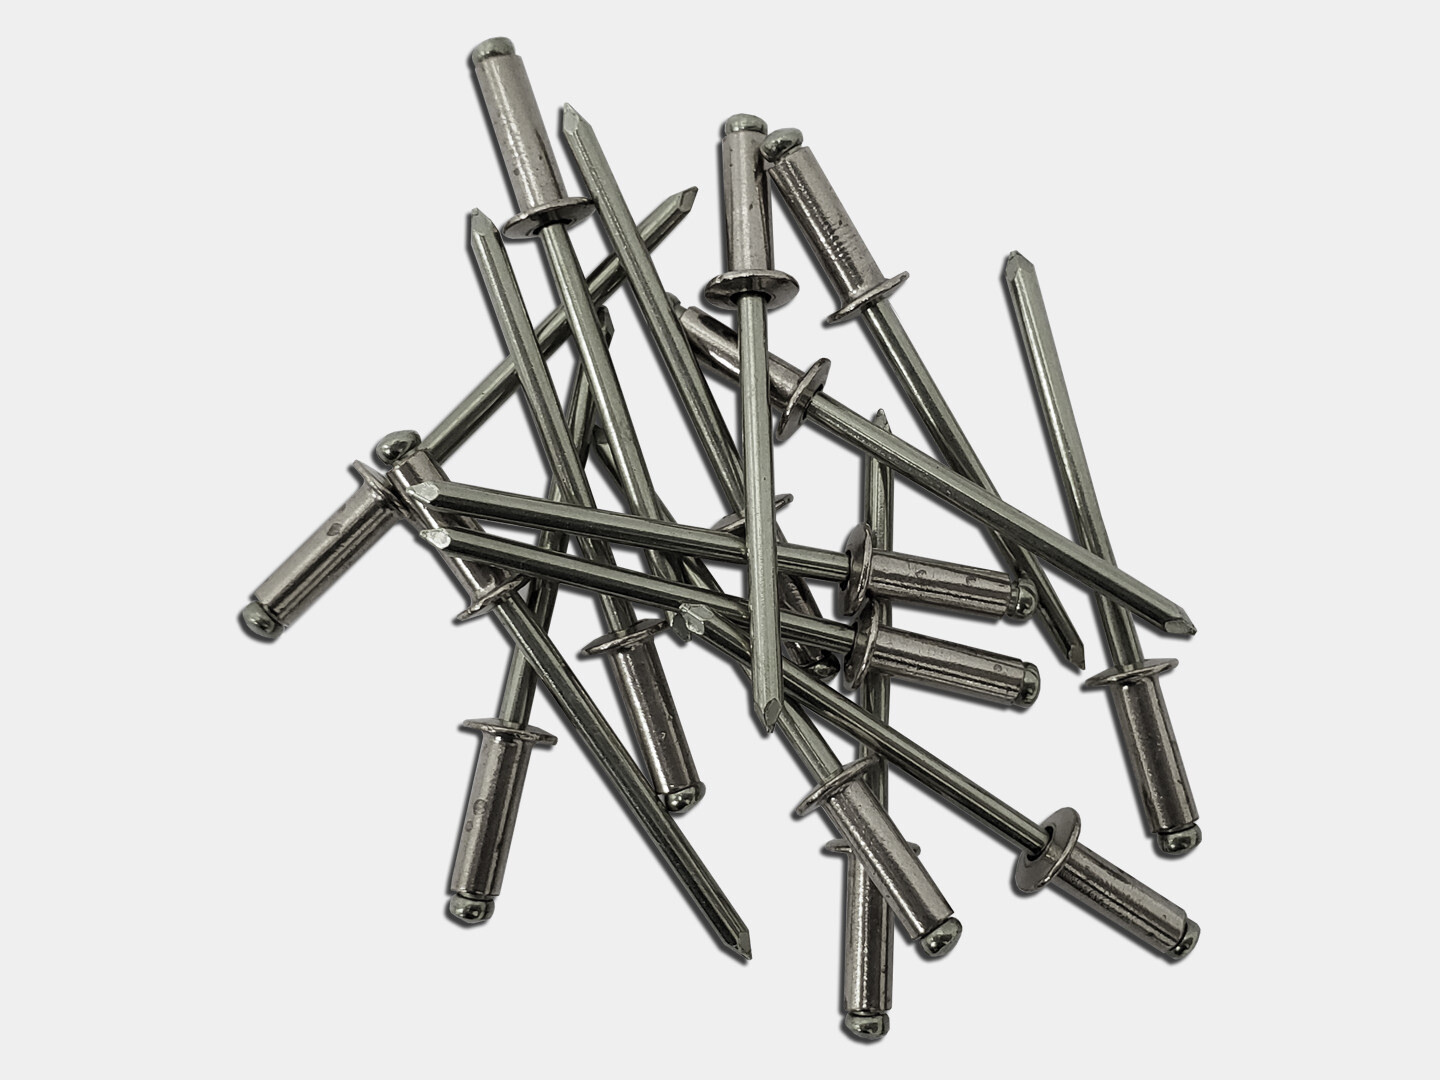 Stainless Steel Pop Rivets 1/8" x 3/8" Dome Head Blind 4-6 Quantity 1000 